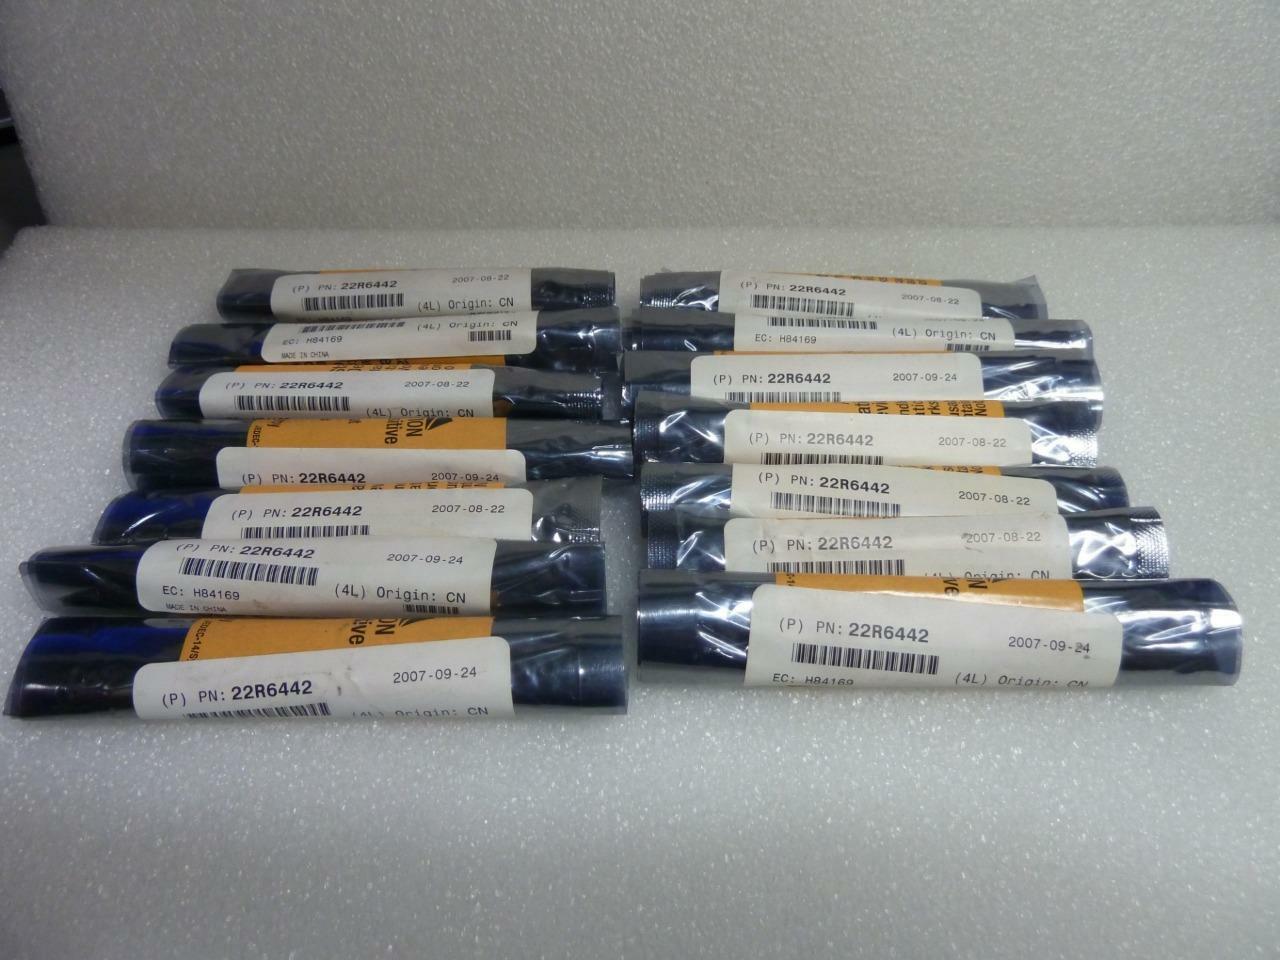 14x IBM 22R6442 SHORT WAVE 4GBPS SFP TRANSCEIVER MODULE (LOT OF 14) NEW